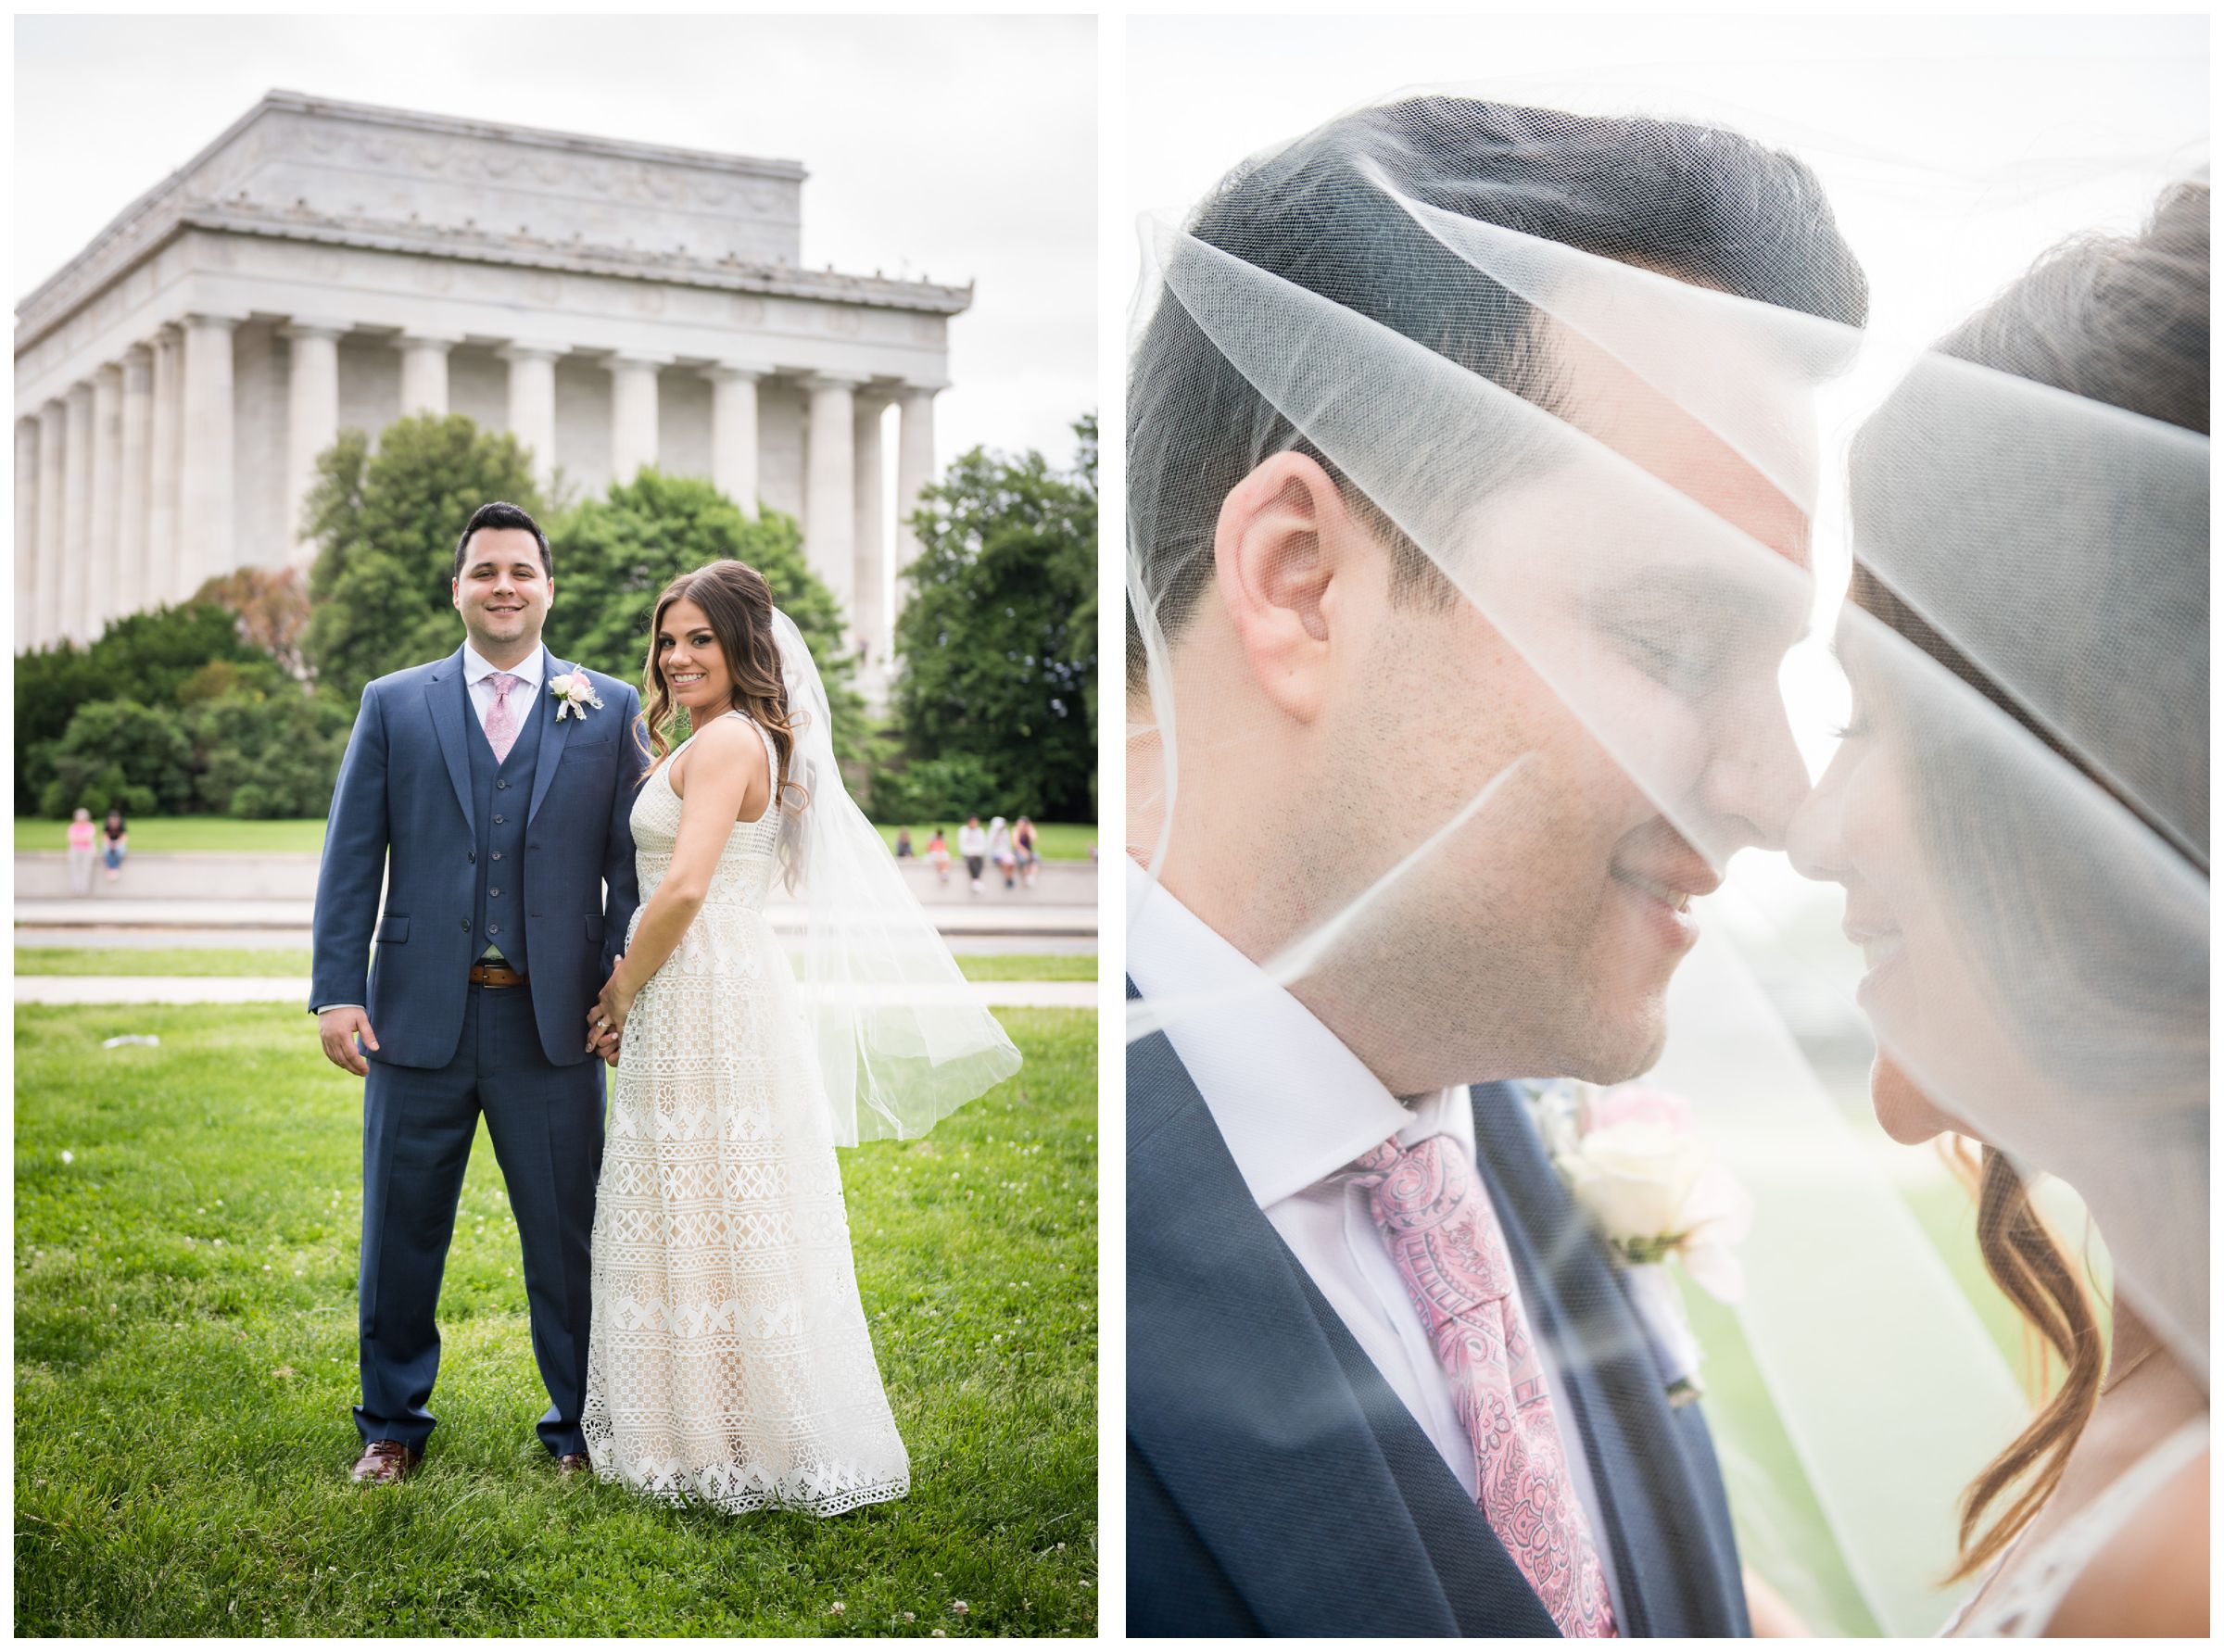 bride and groom in front of Lincoln Memorial during DC monument wedding day